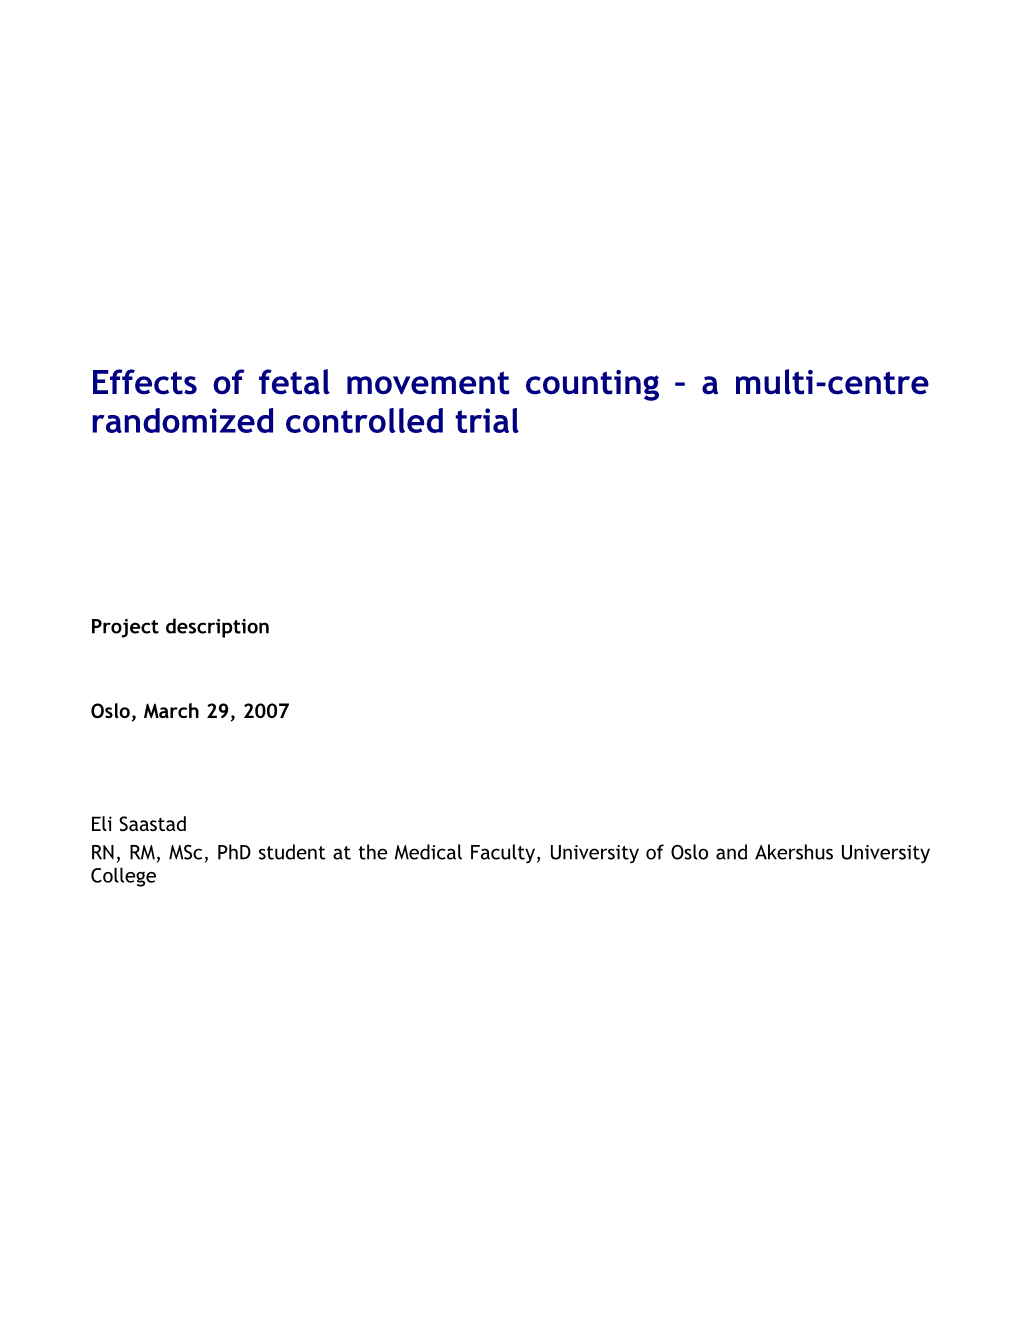 Effects of Fetal Movement Counting a Multi-Centre Randomized Controlled Trial